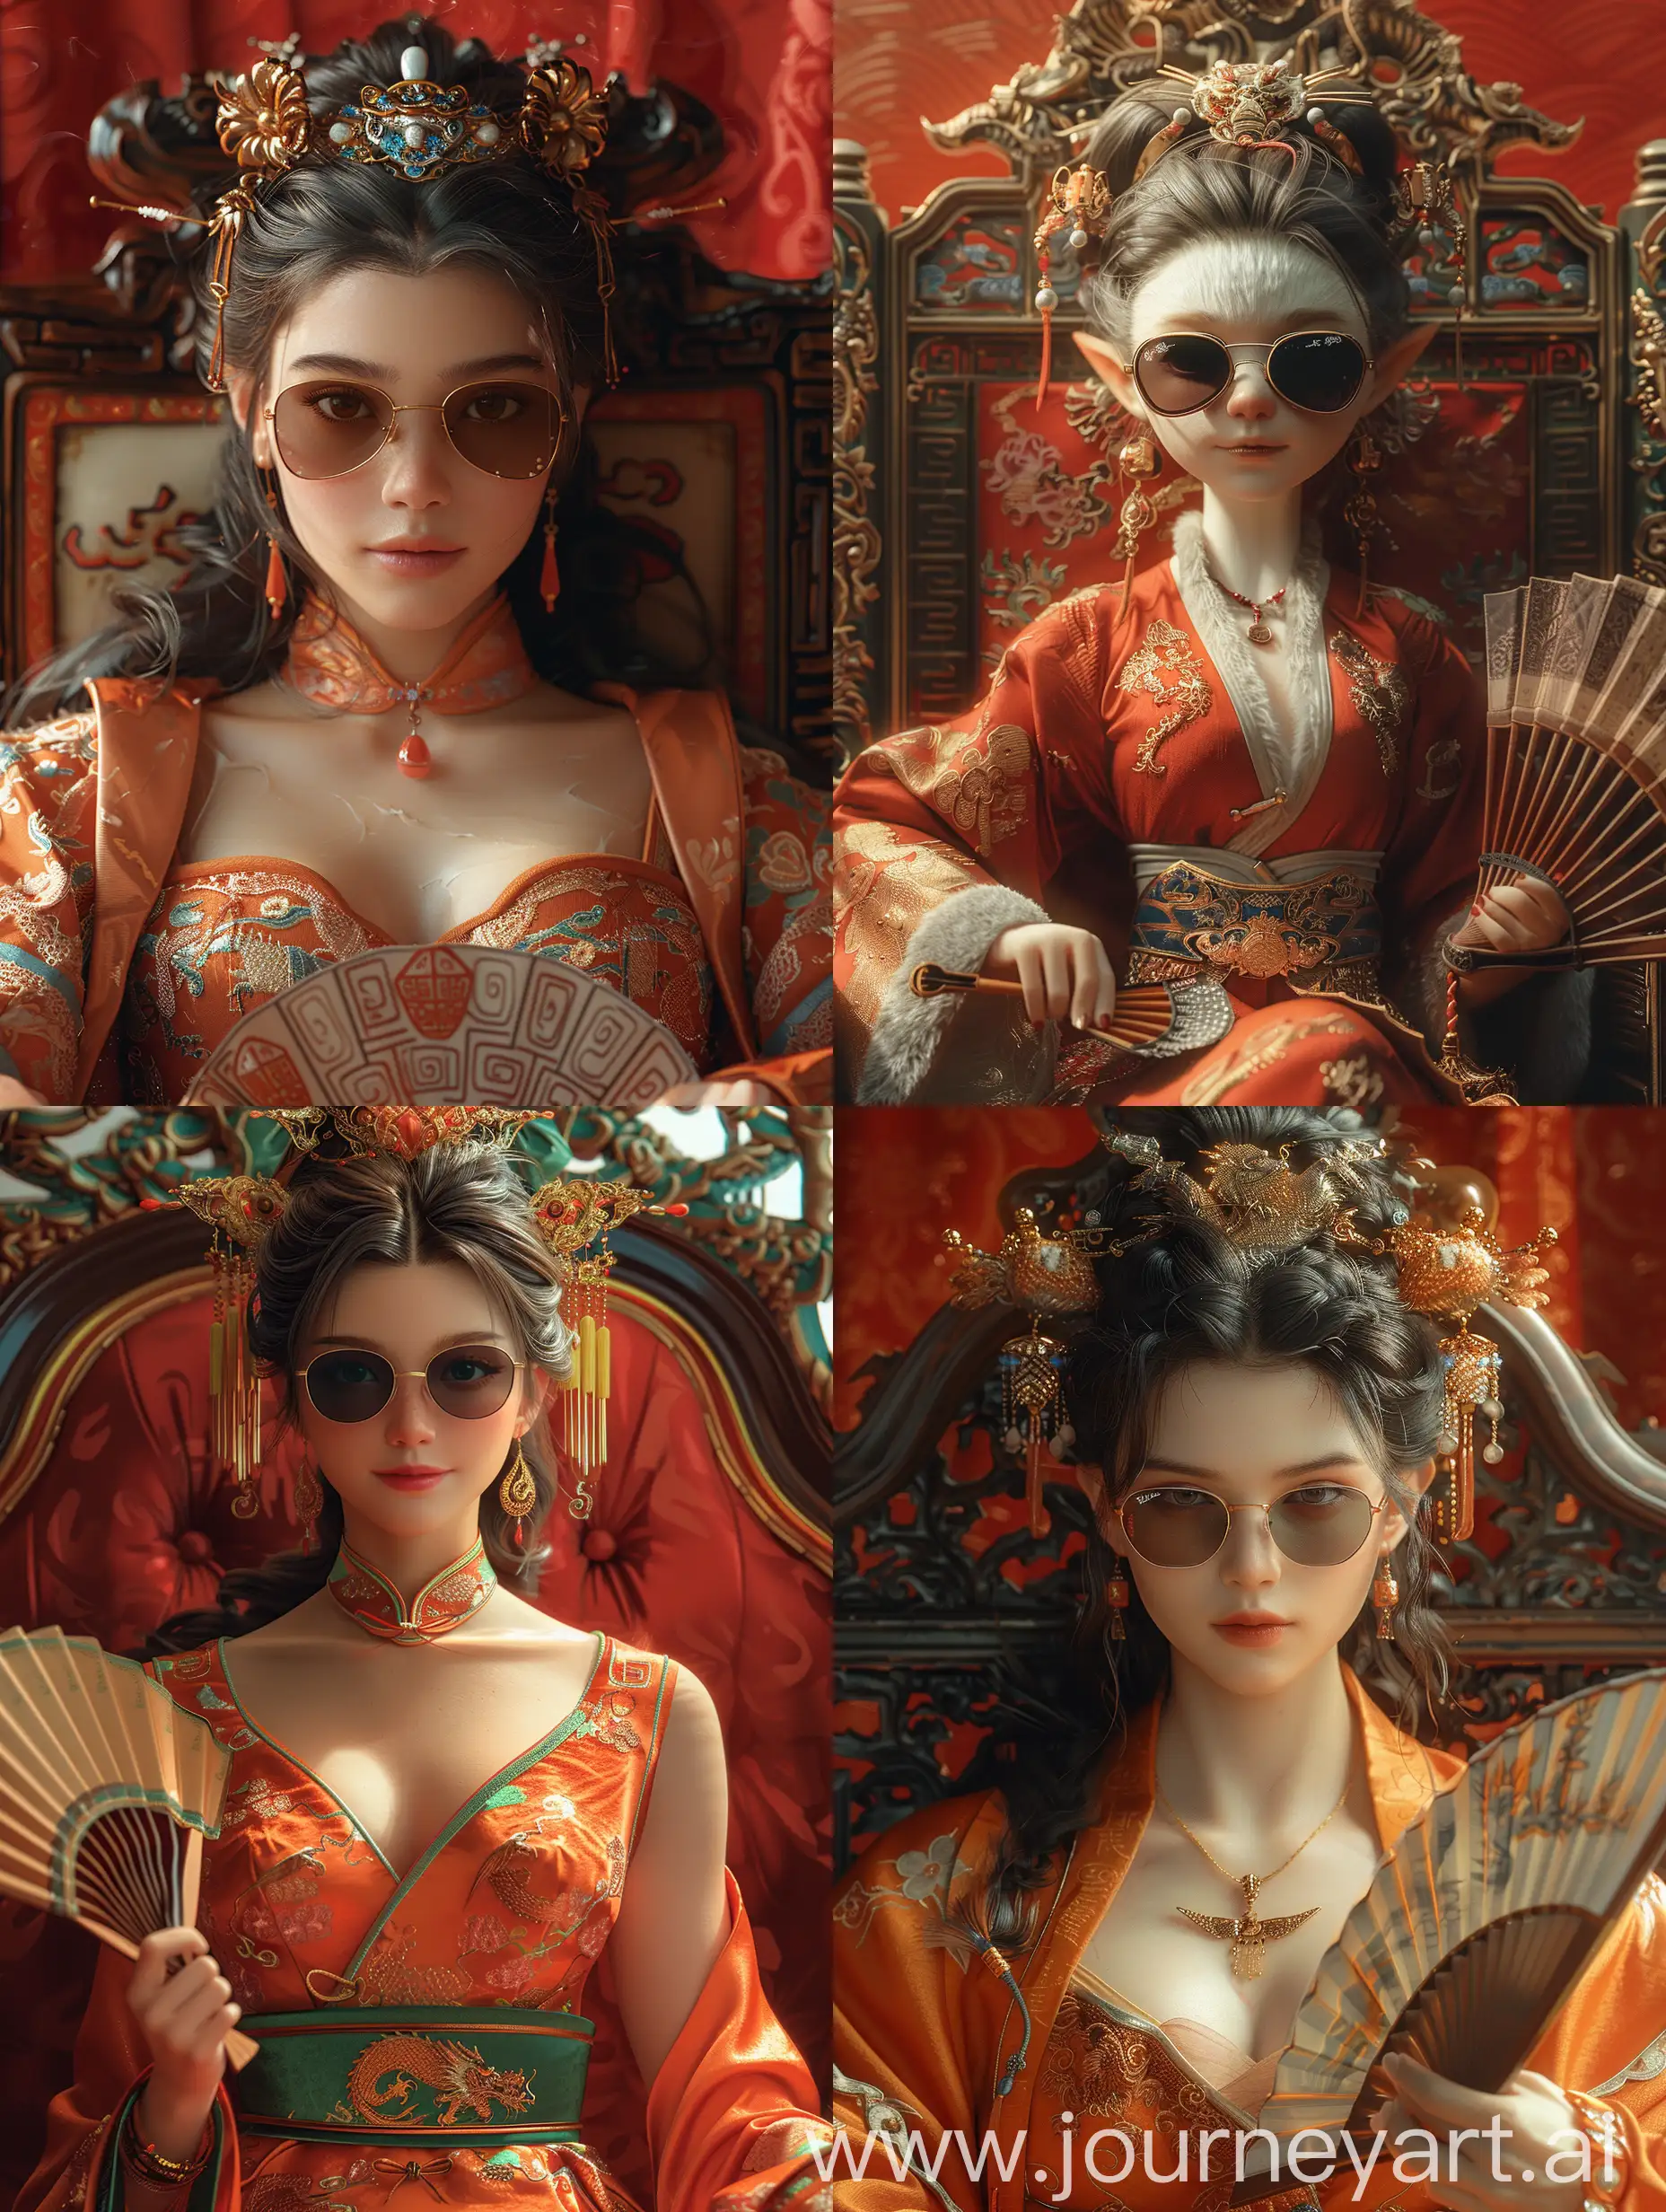 Stylish-Humanized-Female-Chinese-Dragon-Lounging-on-Throne-with-Sunglasses-and-Fan